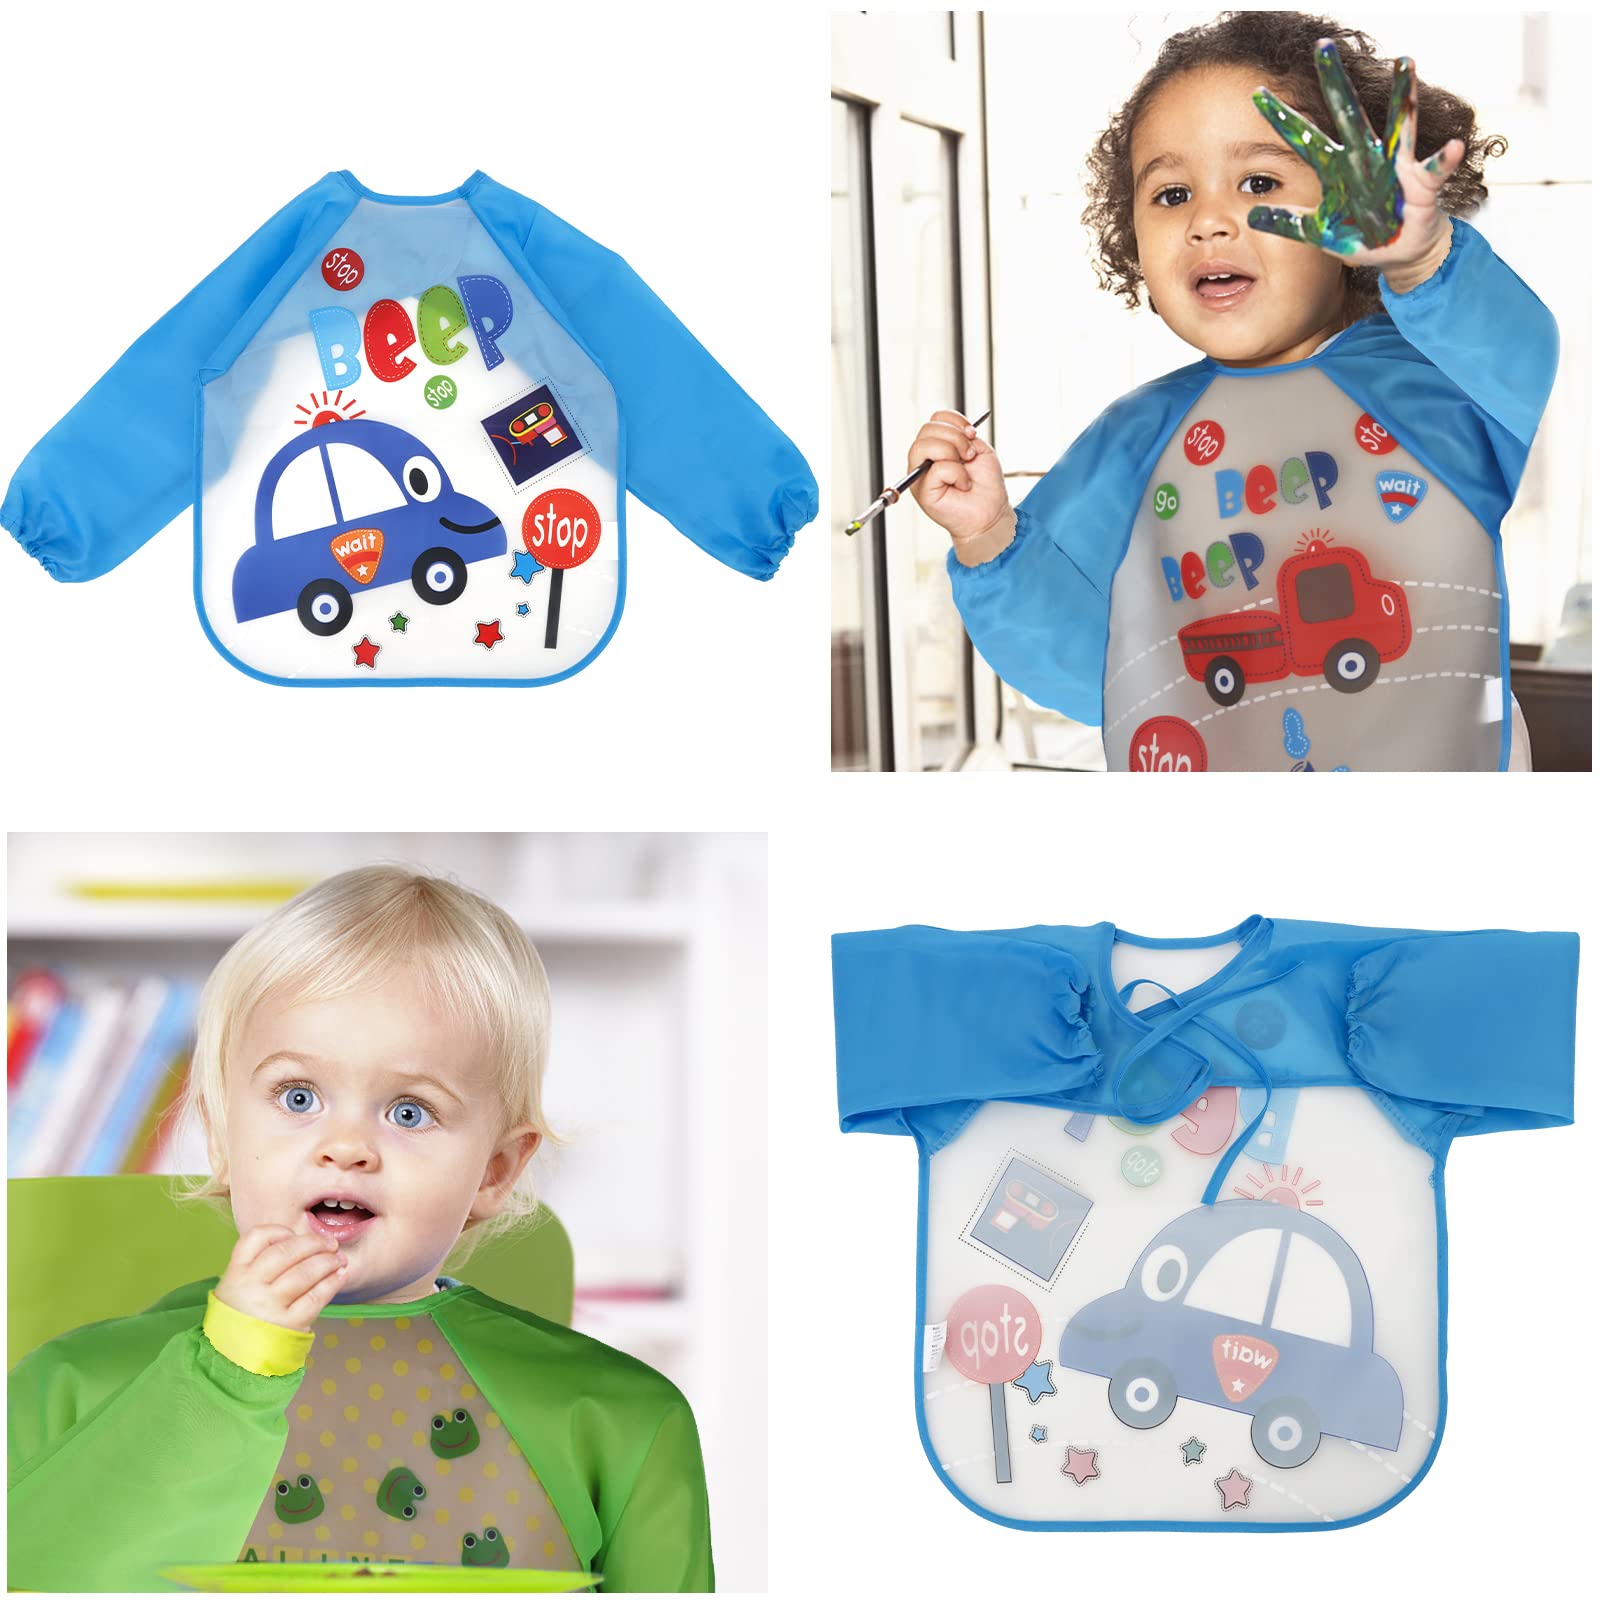 BAHABY 4 Packs Kids Art Smocks Toddler Aprons Painting Apron for Children Waterproof Artist Smock with Long Sleeve